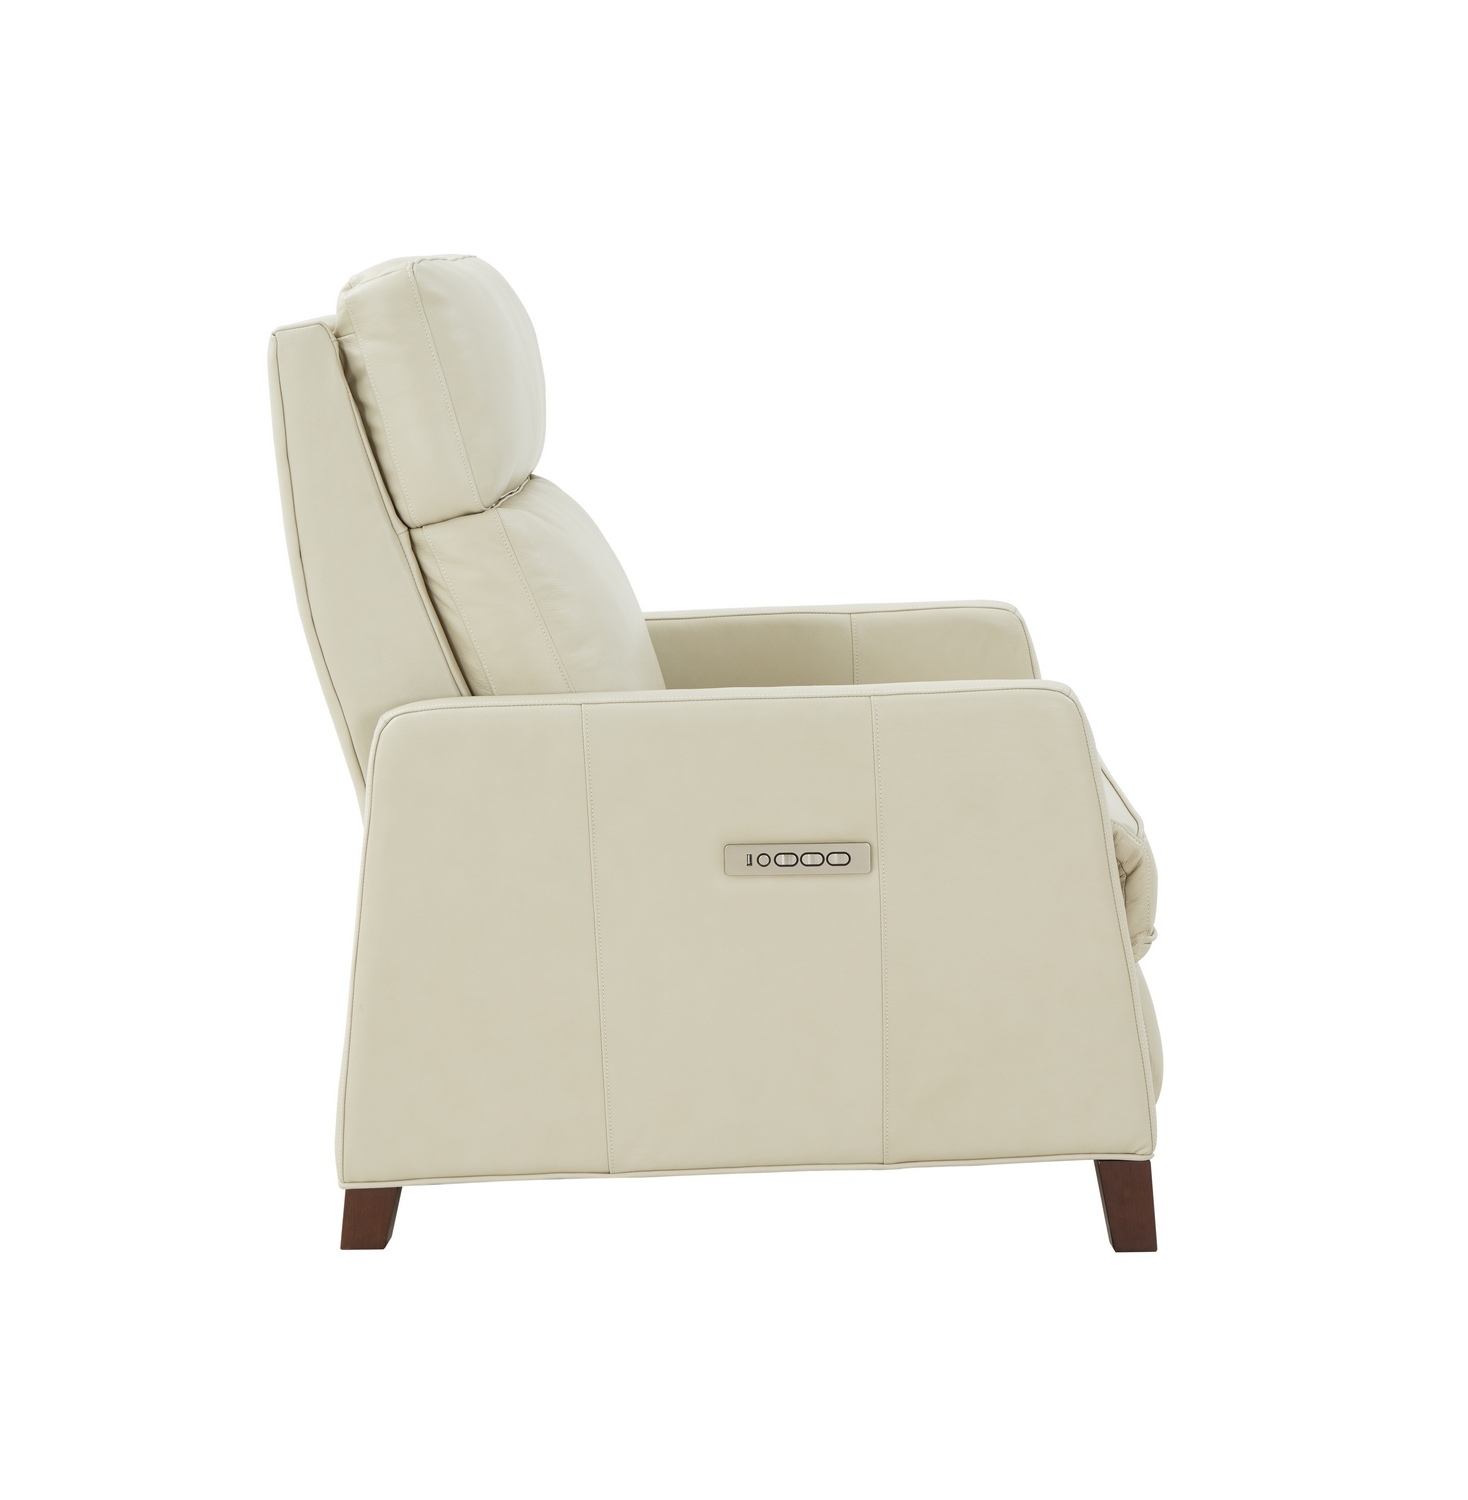 Barcalounger James Zero Gravity Power Recliner Chair with Power Head Rest and Lumbar - Barone Parchment/All Leather